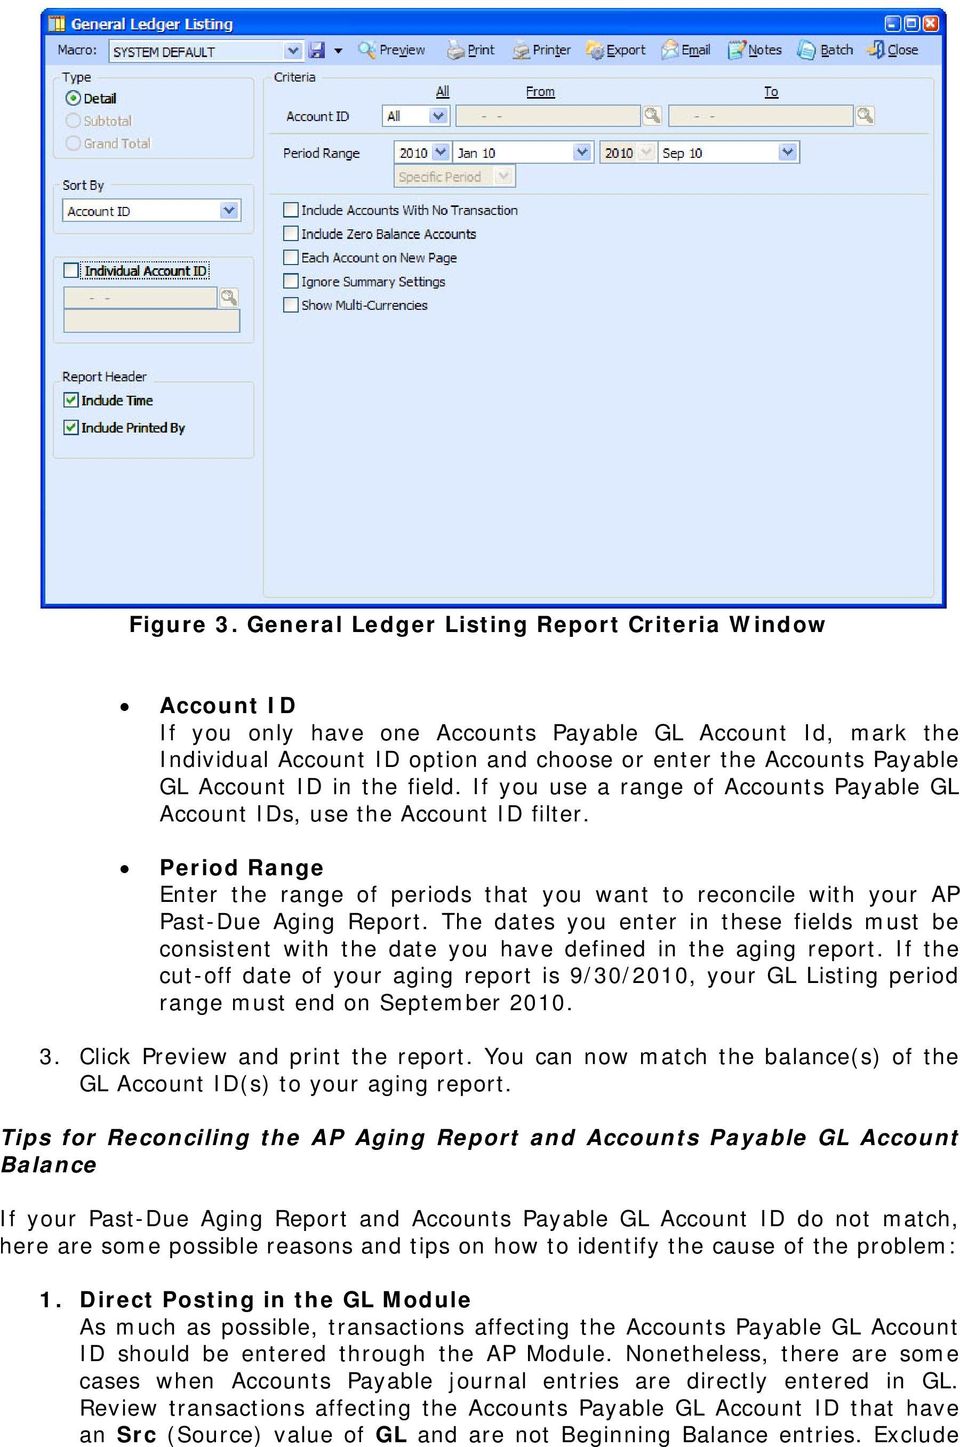 ID in the field. If you use a range of Accounts Payable GL Account IDs, use the Account ID filter.